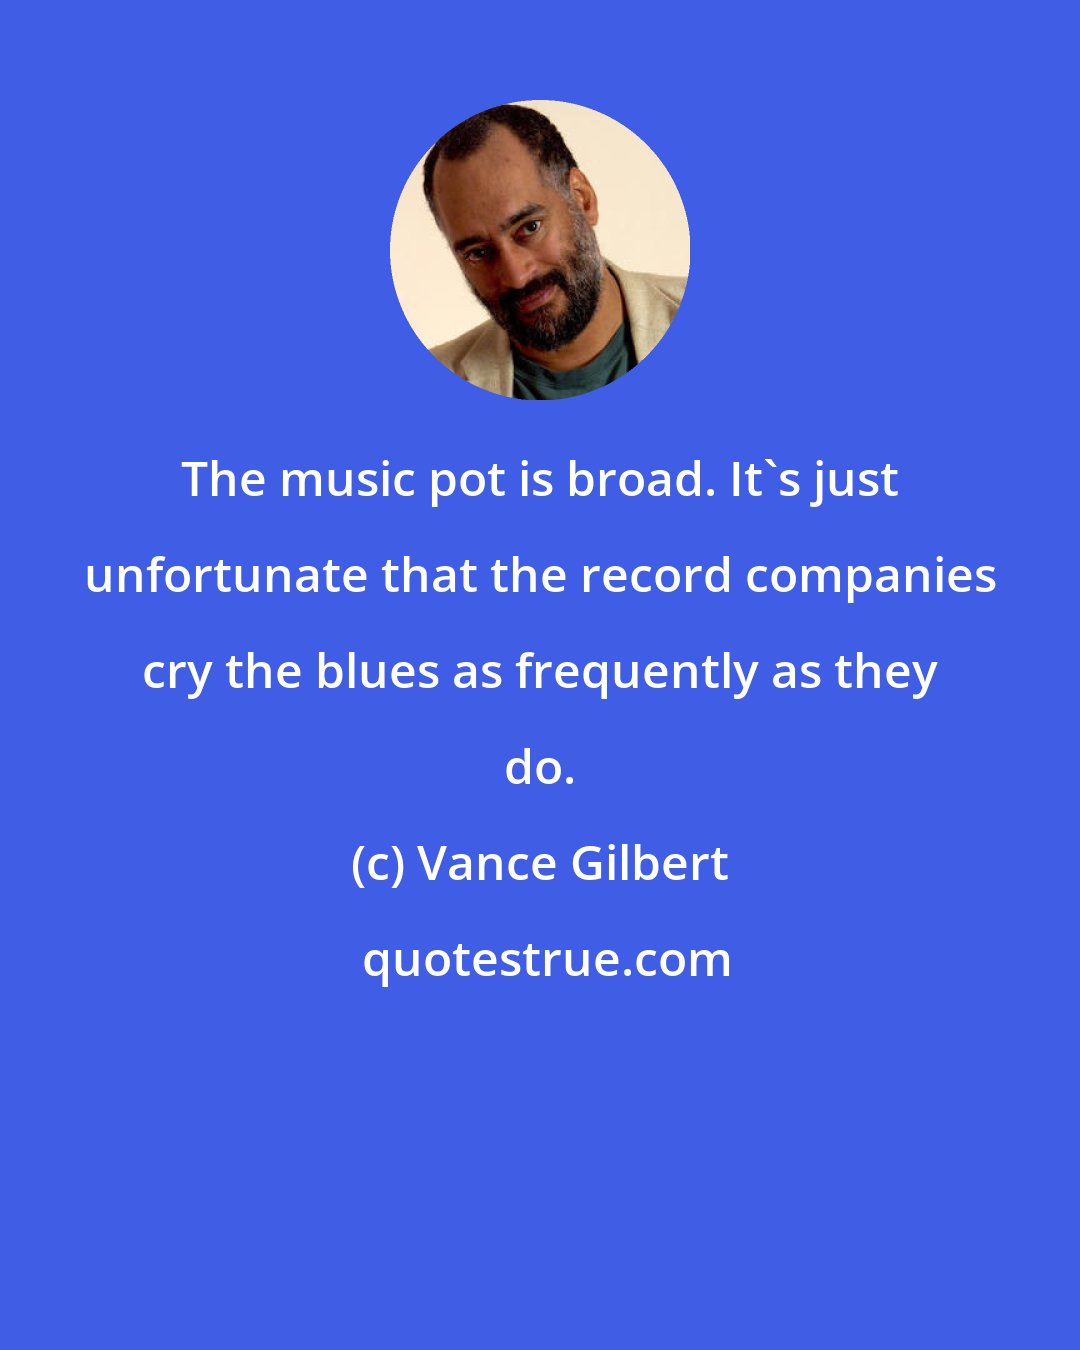 Vance Gilbert: The music pot is broad. It's just unfortunate that the record companies cry the blues as frequently as they do.